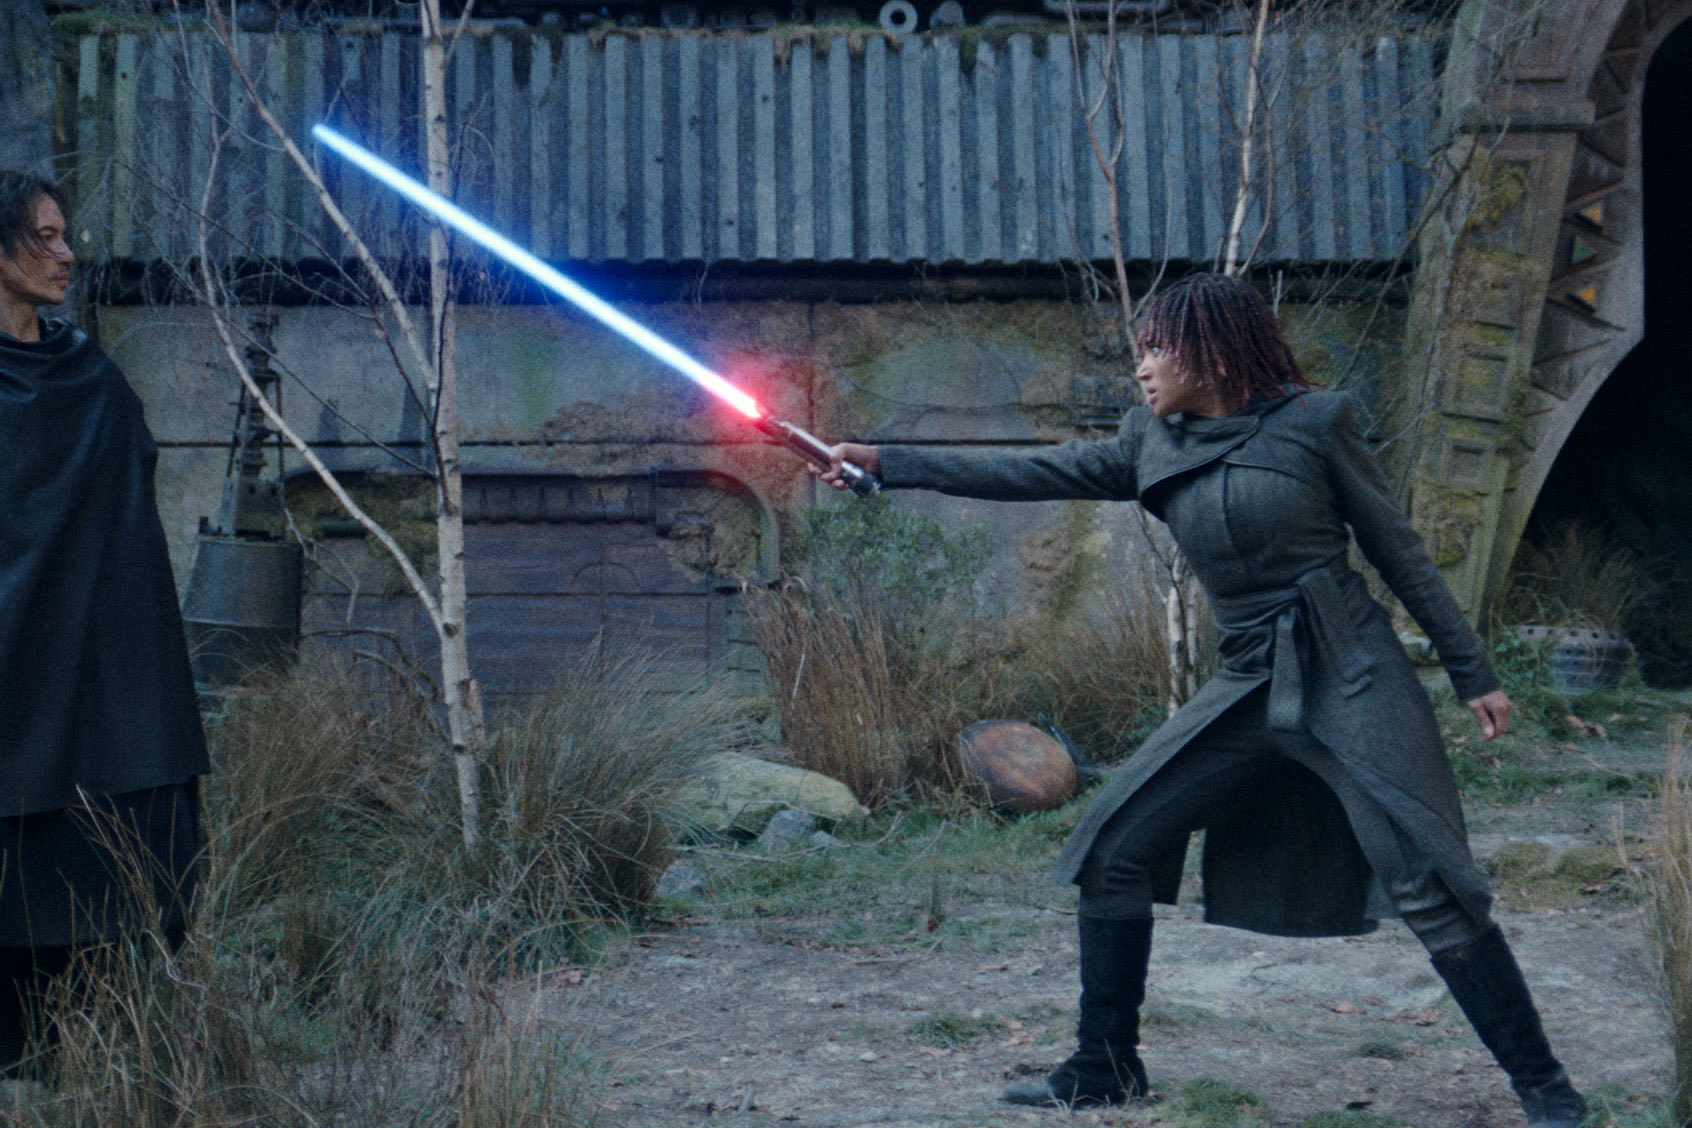 "Star Wars: The Acolyte": Pain makes a lightsaber bleed – but who causes that pain?